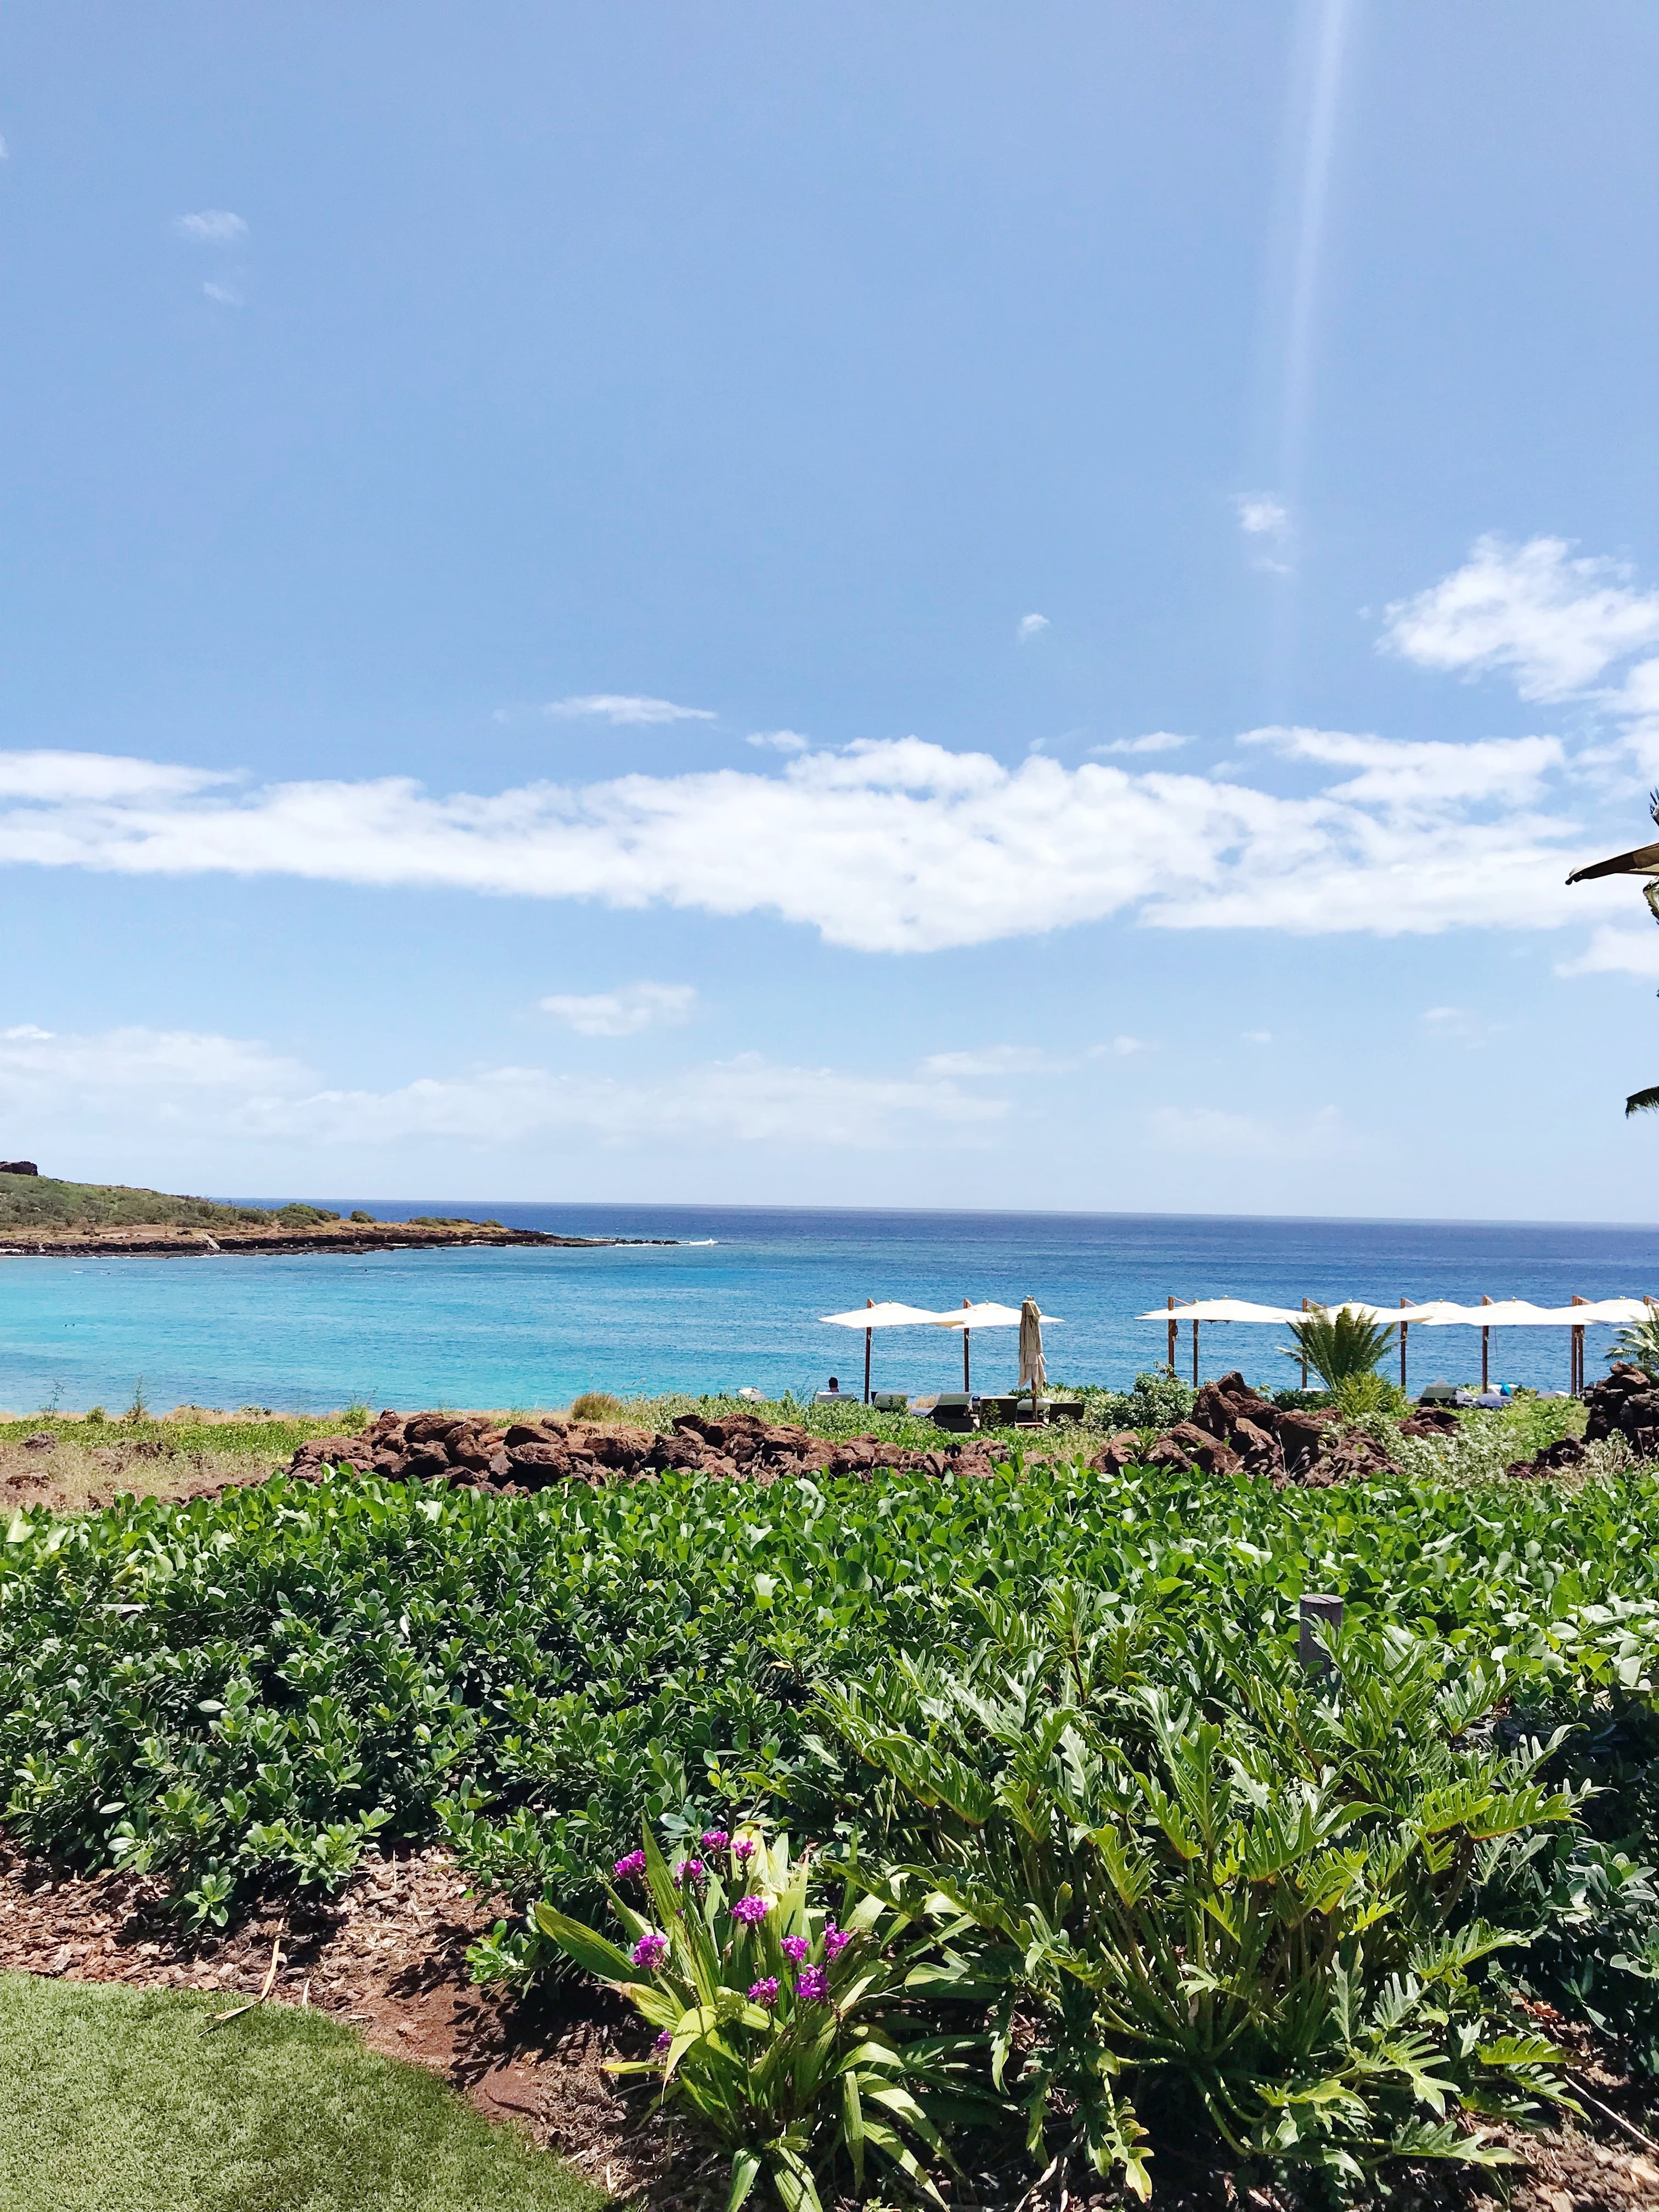 Our Stay At Four Seasons Lanai - Everything you need to know about staying at Four Seasons Lanai and visiting the Hawaiian island of Lanai! | Four Seasons Resort Lanai - Four Seasons Lanai - Four Seasons Hawaii - Lanai Hawaii Four Seasons - Four Seasons Hawaii Lanai - Lanai Hawaii - Where Is Lanai - #lanai #hawaii #travel